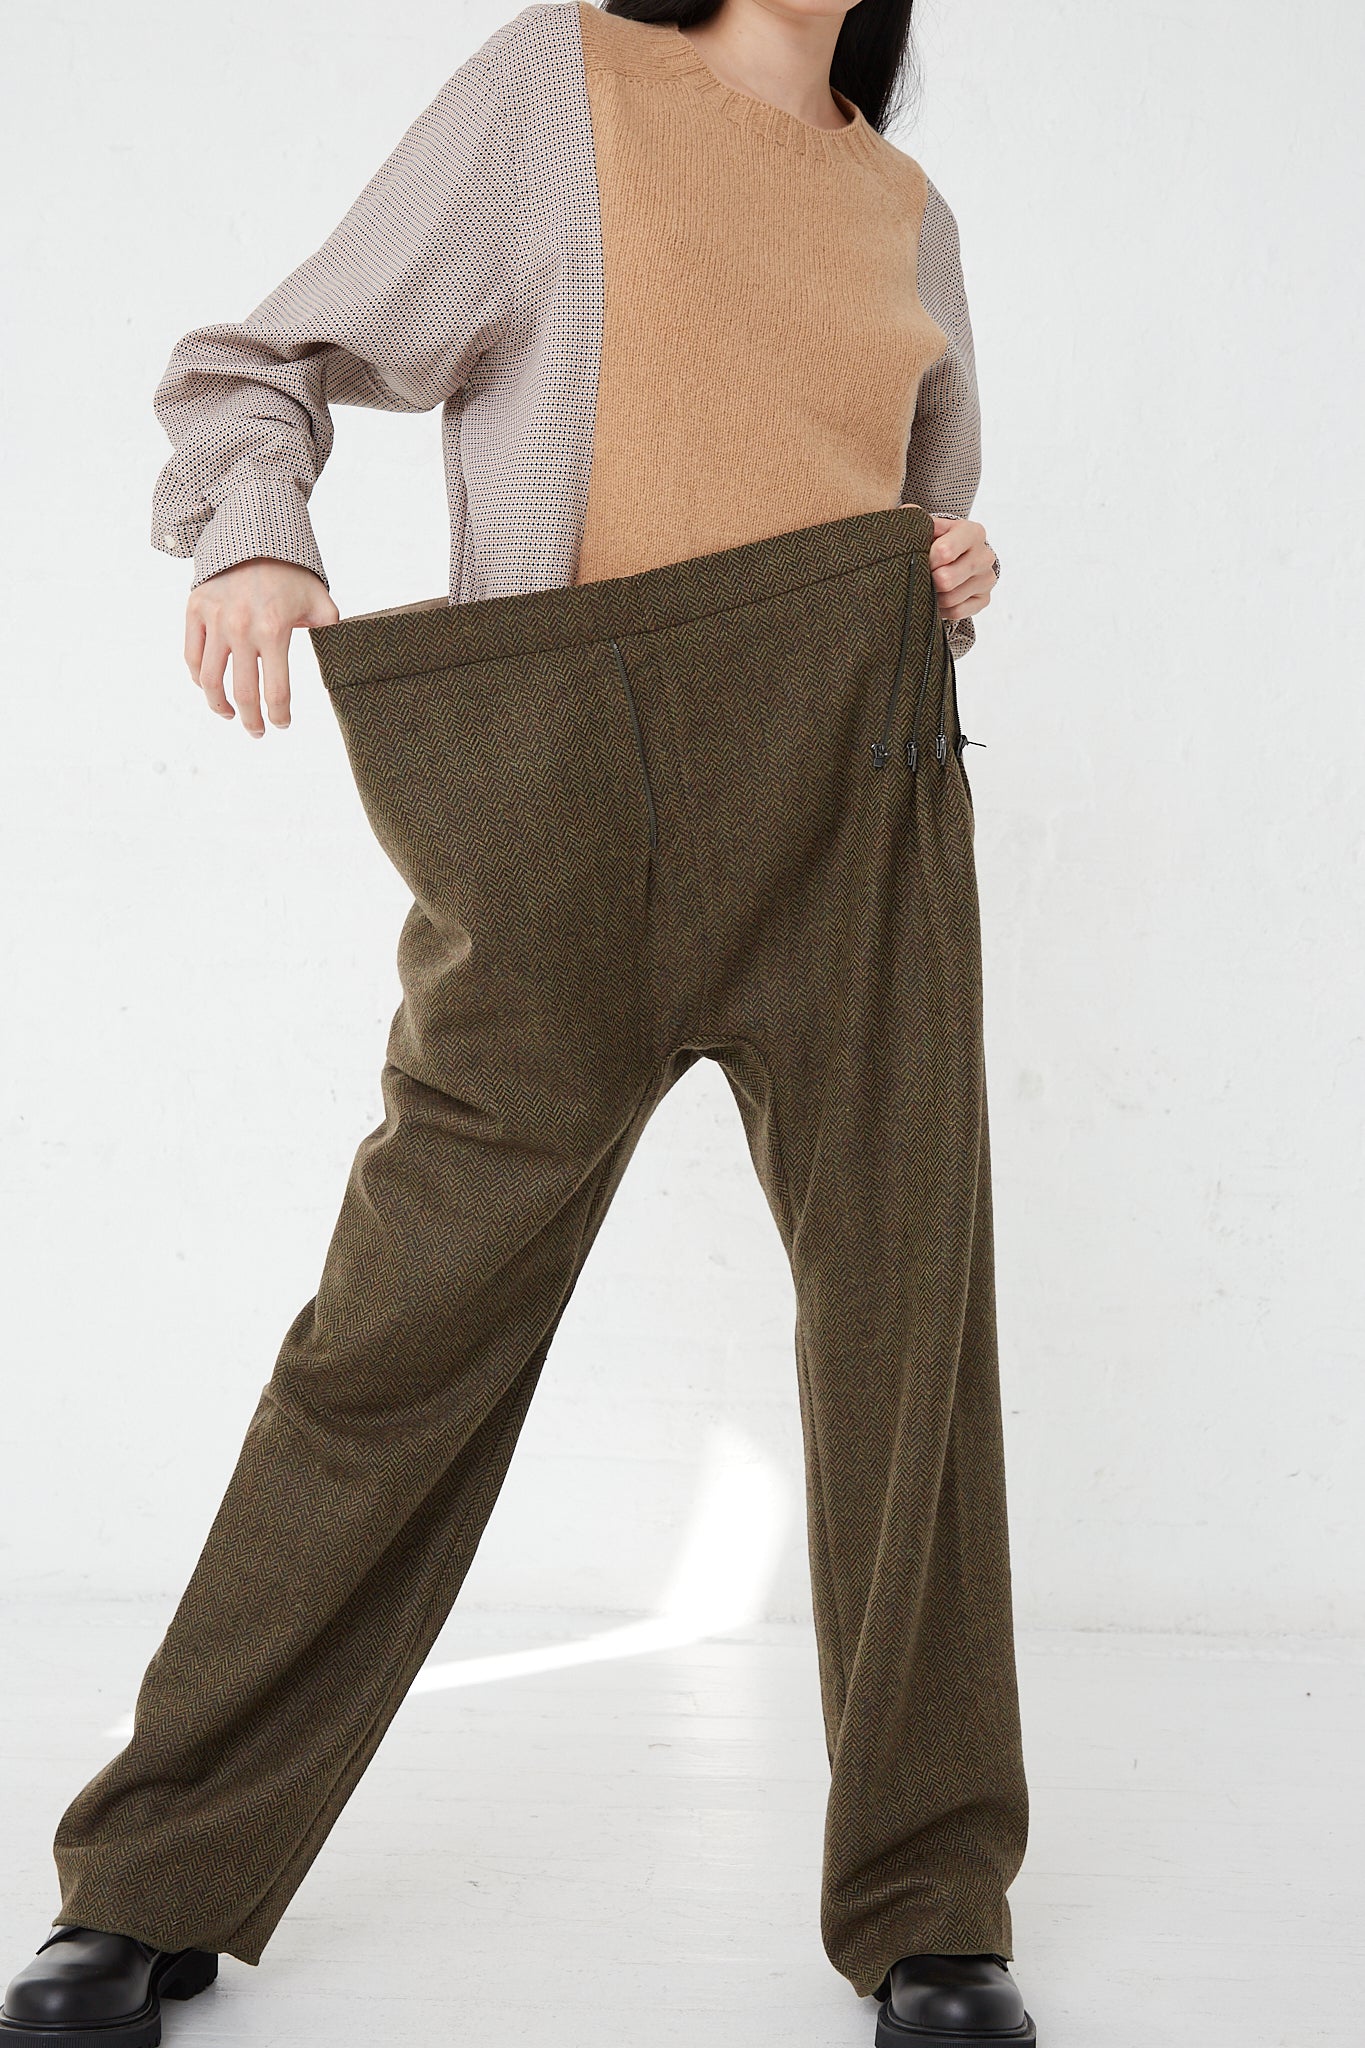 A woman is standing in front of a white wall holding a pair of Bless No. 75 Wool Long Pant in Purple Greenish Tweed with an adjustable zipper accent in front.